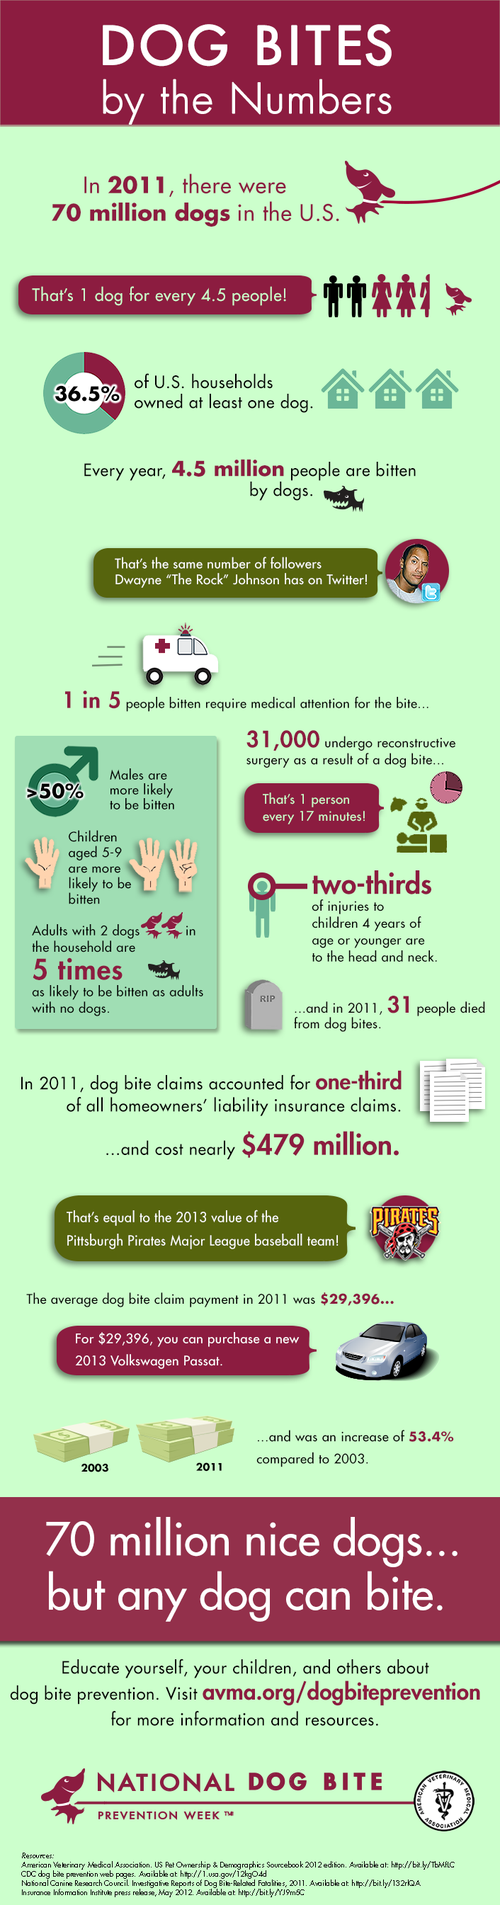  Dog bites by the numbers